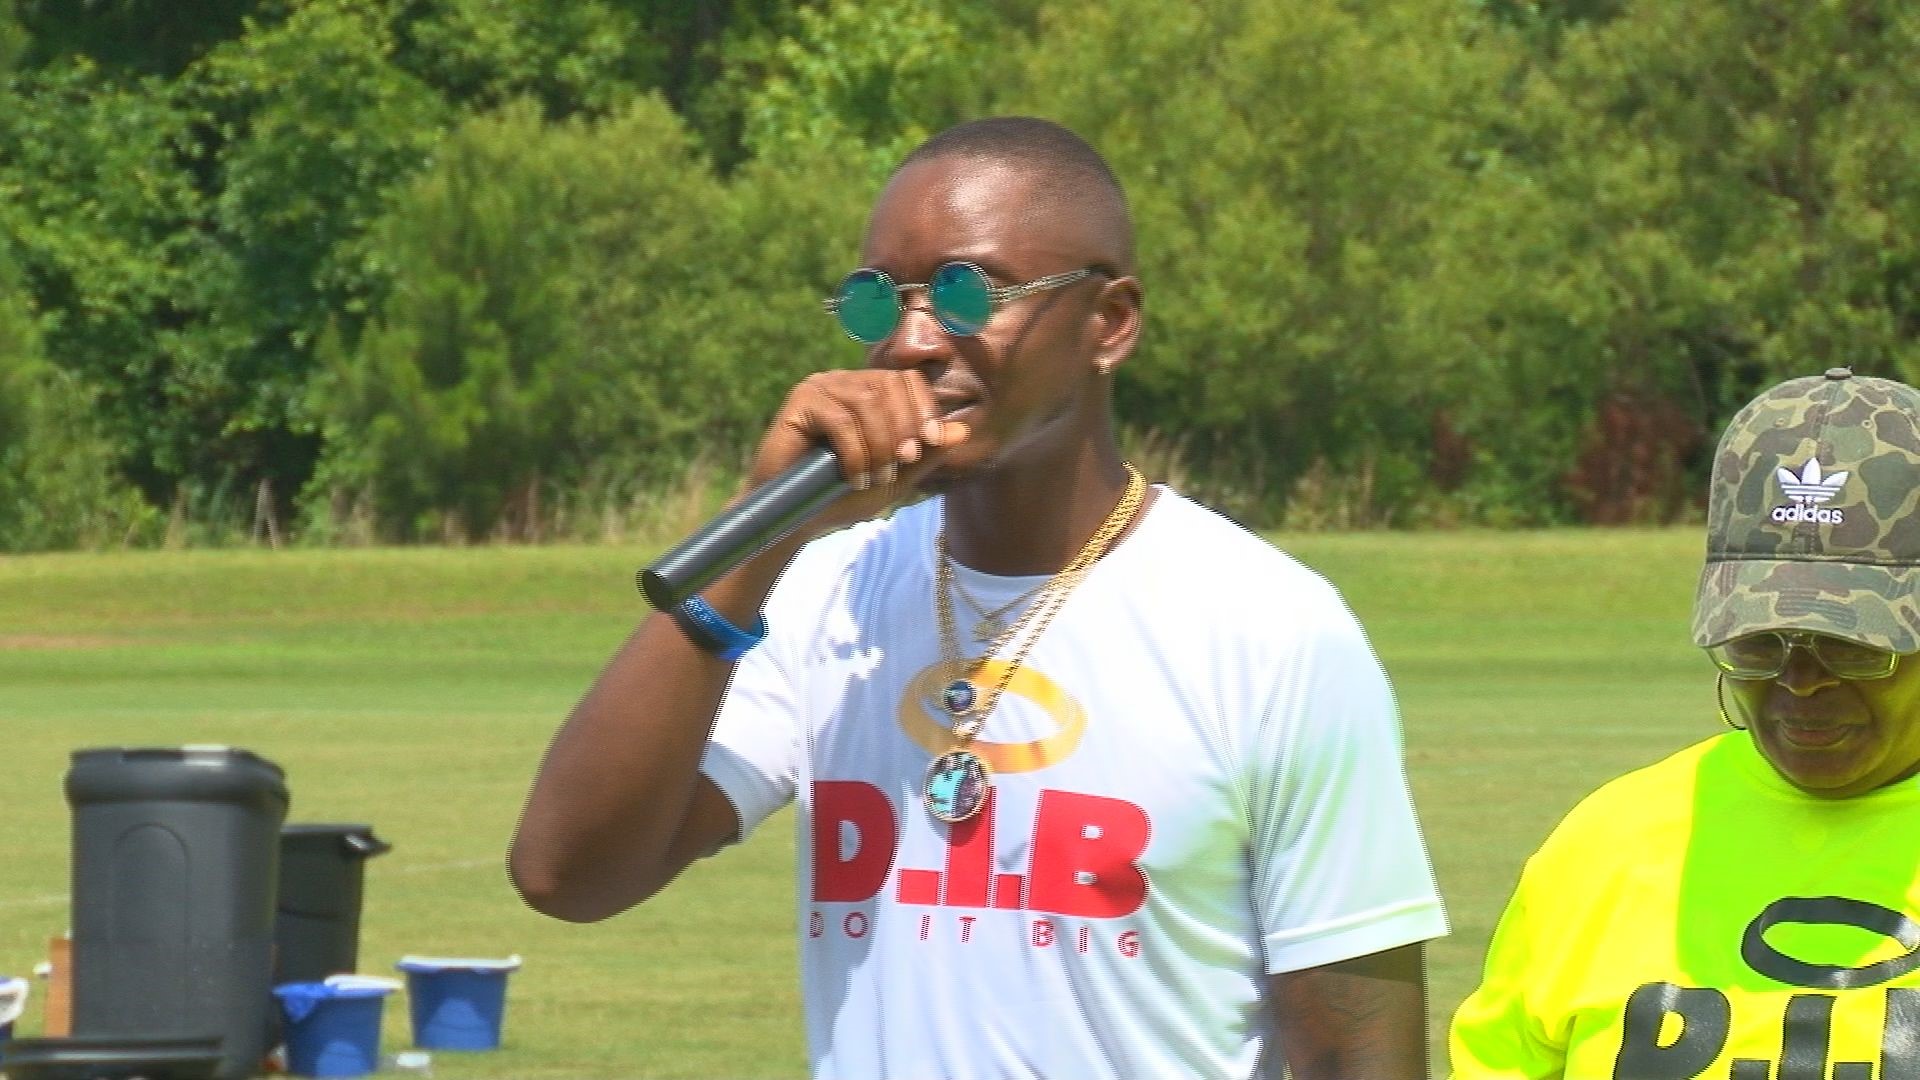 The annual tournament is held by Sumter native and former NFL Defensive Back Mariel Cooper, in honor of his brother Destin, who passed away in 2015.